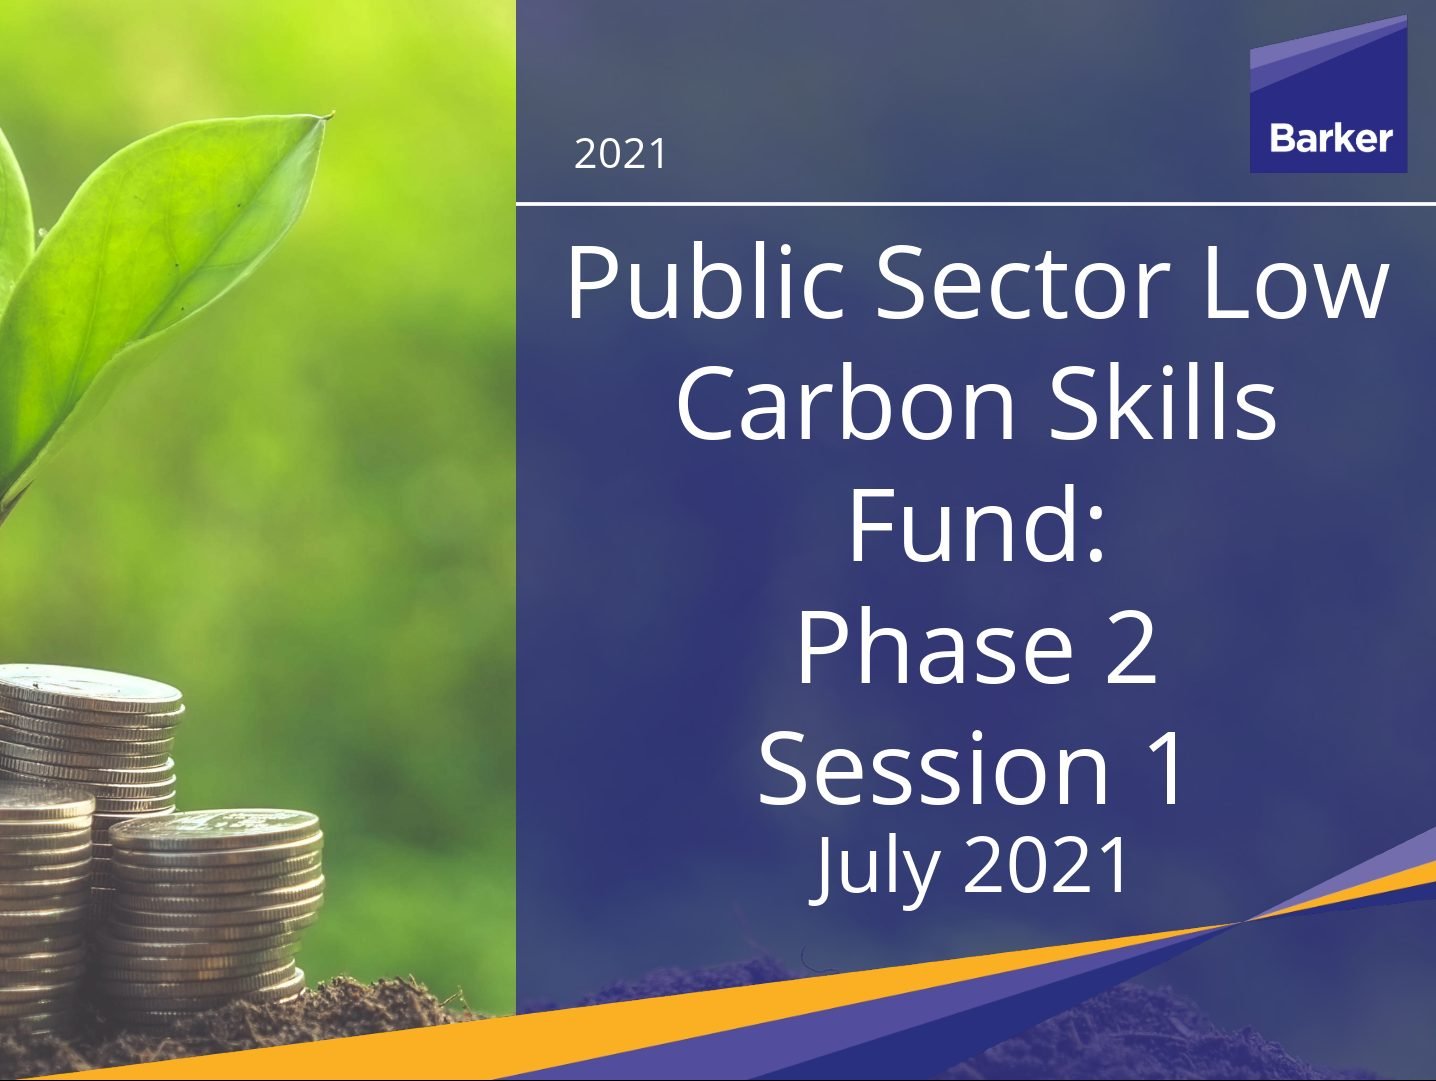 Public Sector Low Carbon Skills Fund